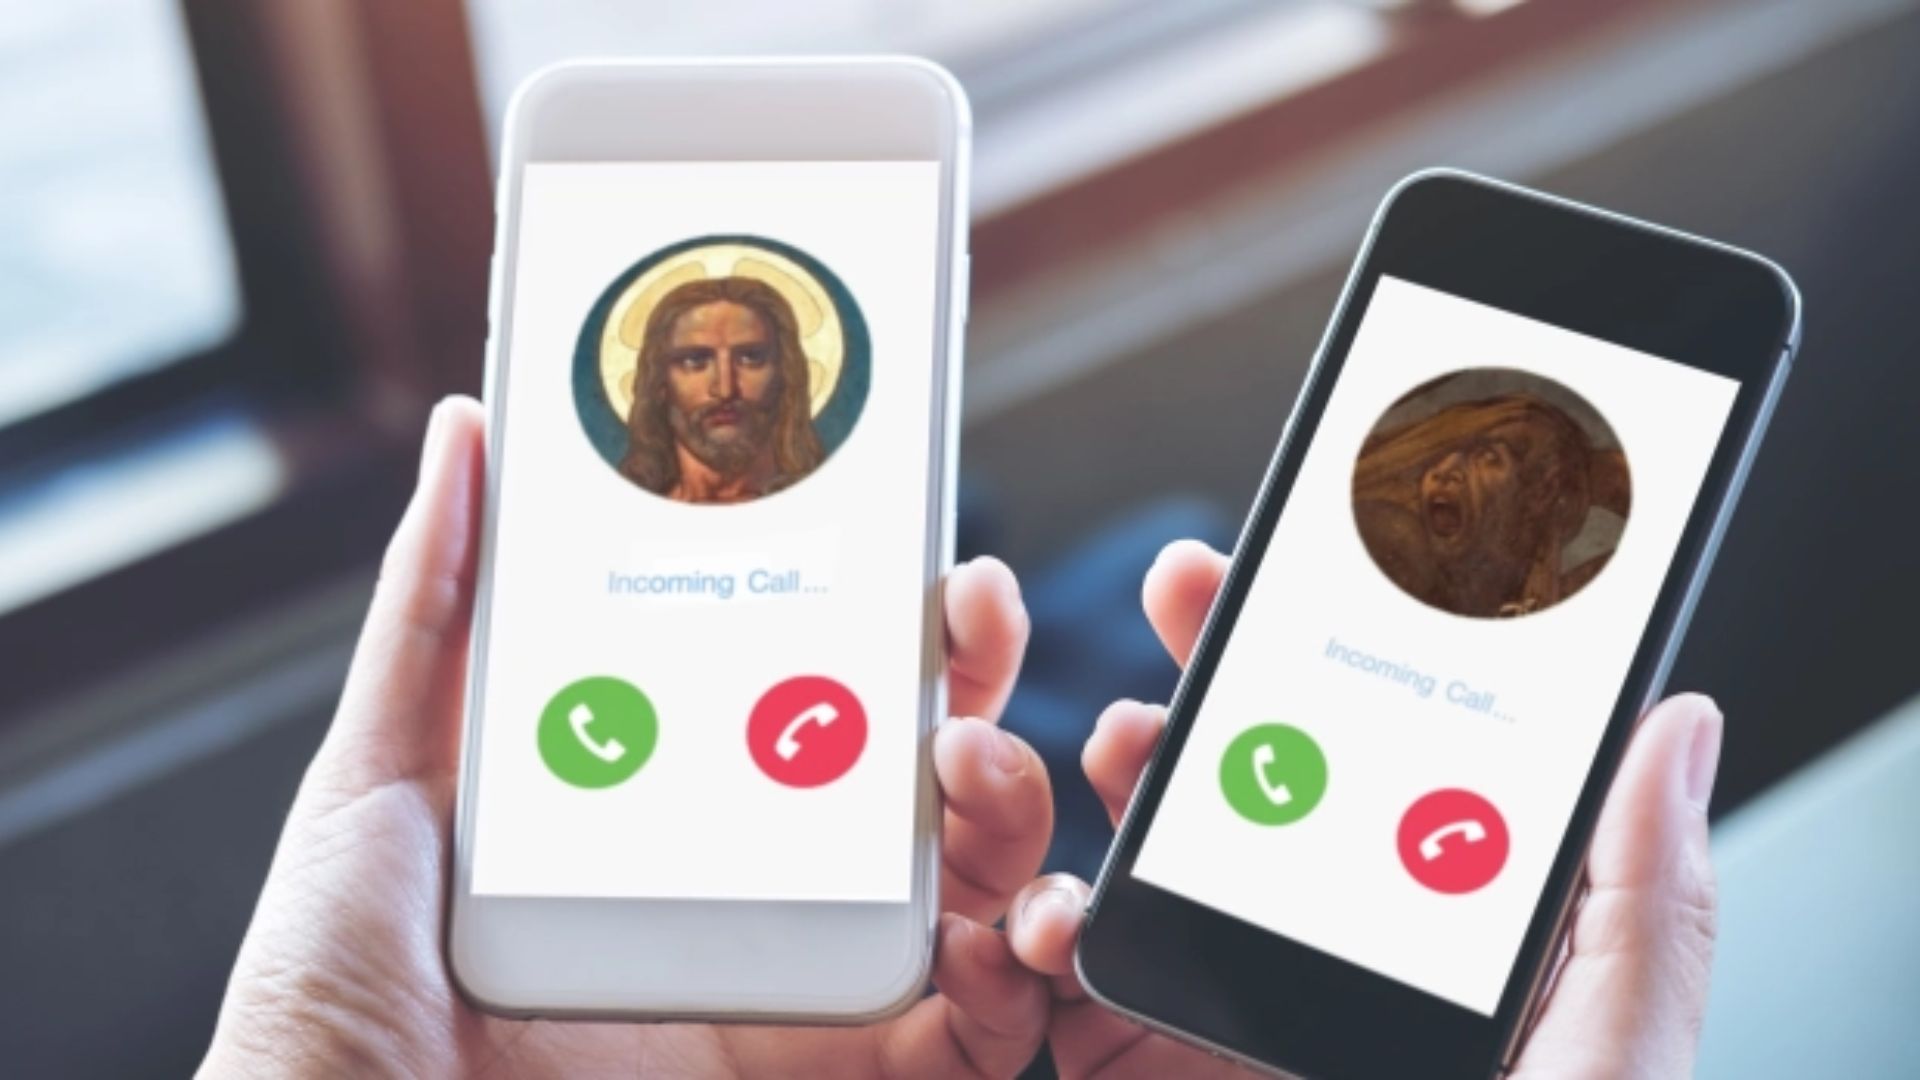 Jesus And Satan Calling On Different Mobile Phones